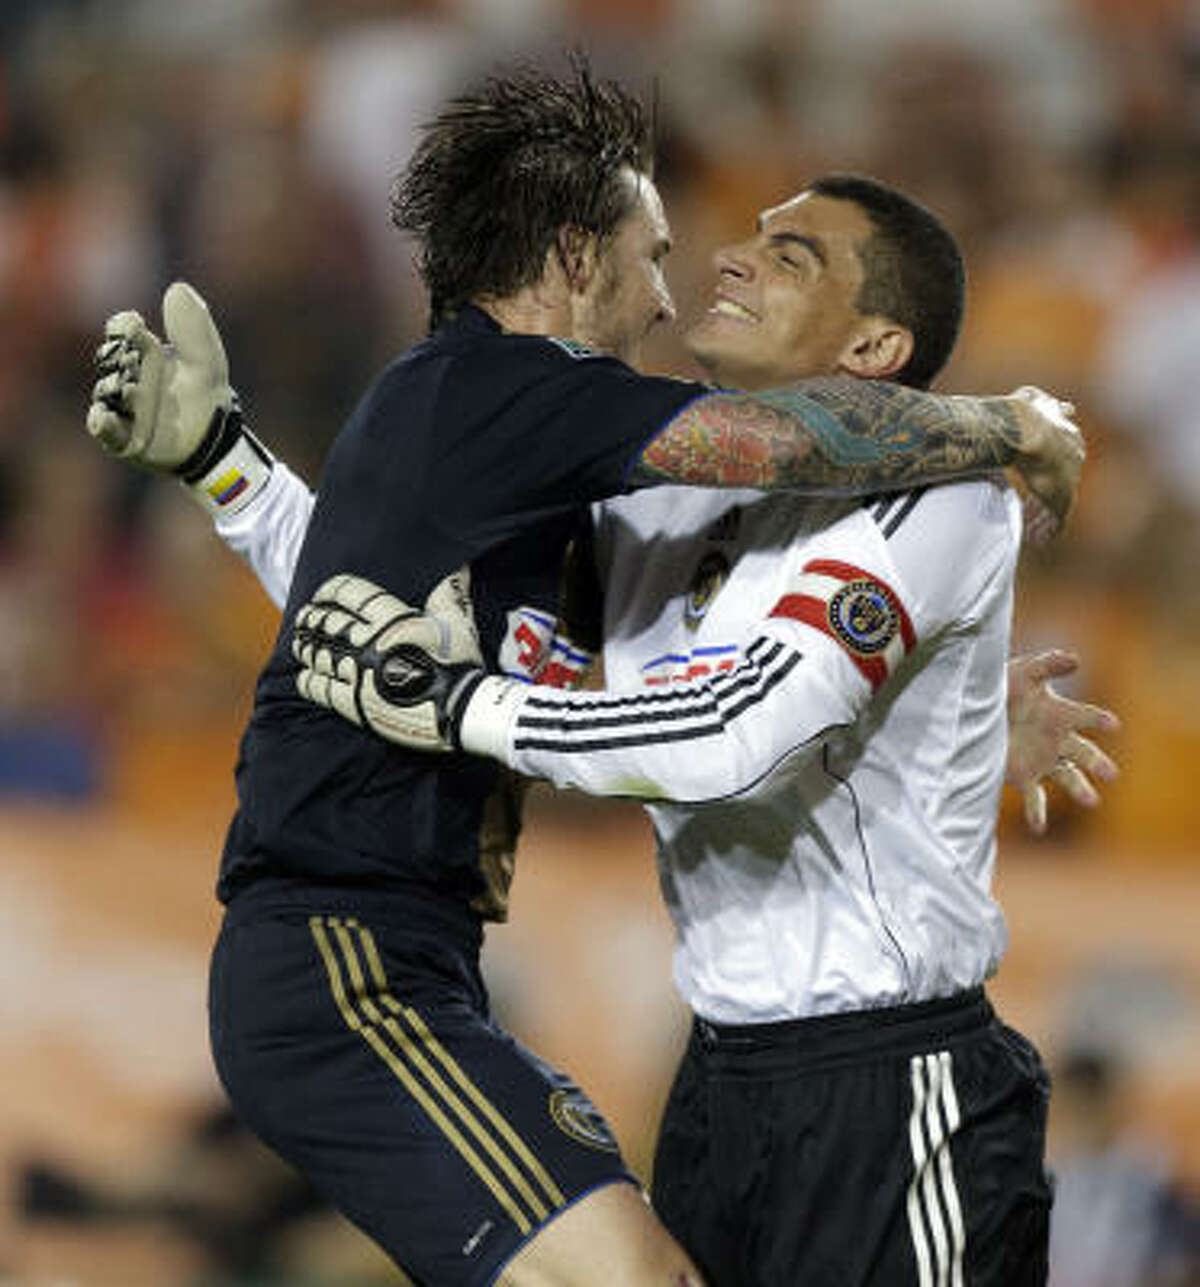 Union goalkeeper Faryd Mondragon, right, receives congratulations from teammate Danny Califf at the final whistle as they defeated the Dynamo, 1-0, at Robertson Stadium.